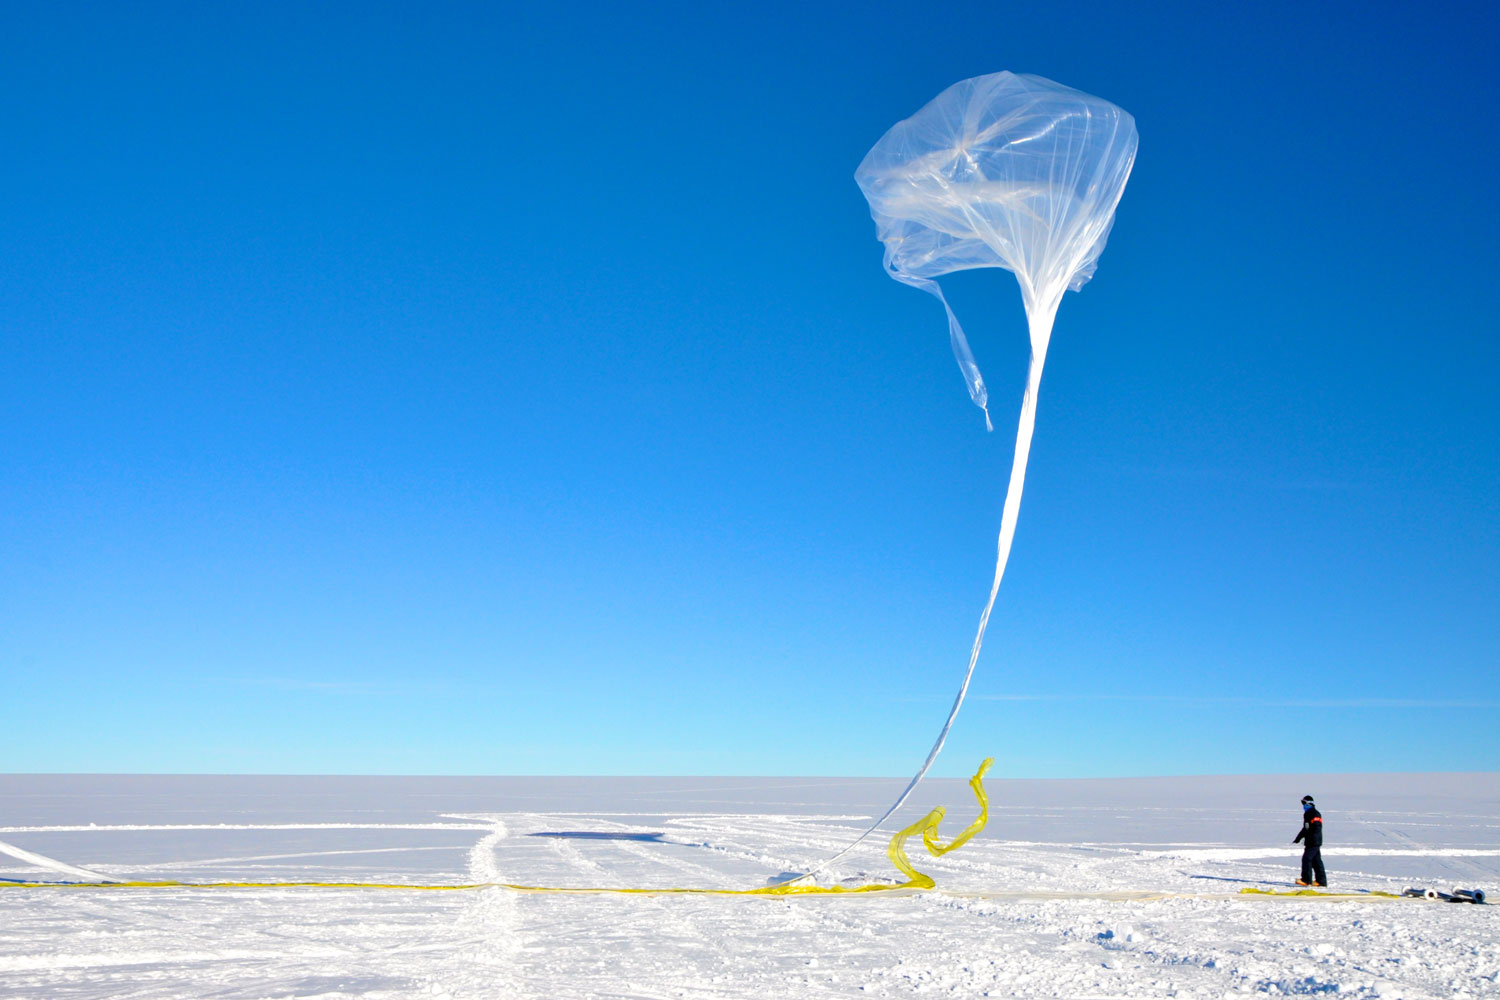 One of NASA's 20 BARREL balloons in Antarctica, where they have been deployed to help unravel the mysterious Van Allen belts, two gigantic donuts of radiation that surround Earth.